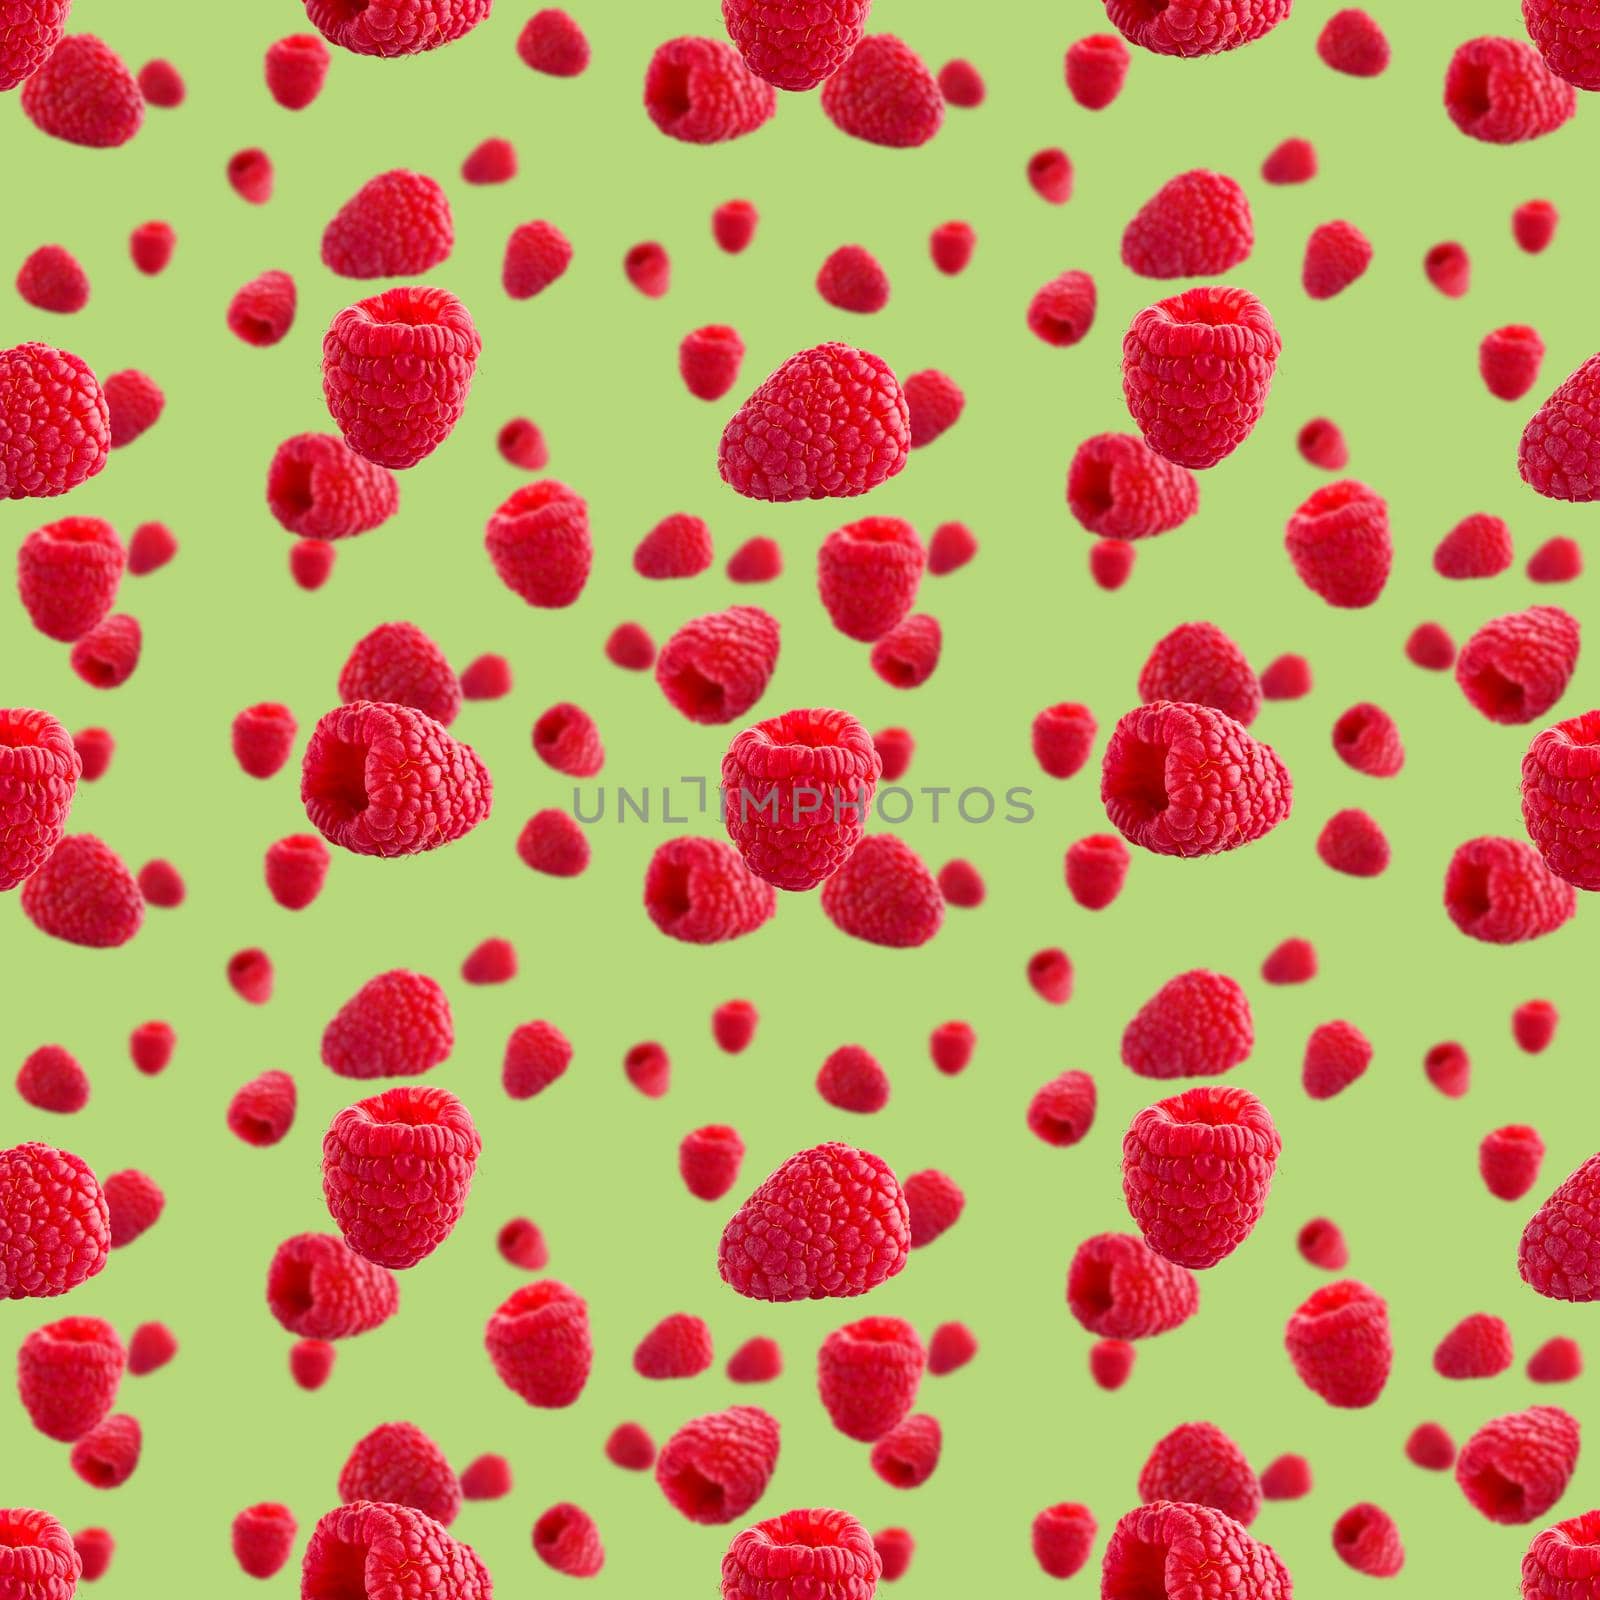 Seamless pattern with ripe raspberry. Berries abstract background. Raspberry pattern for package design with green background.